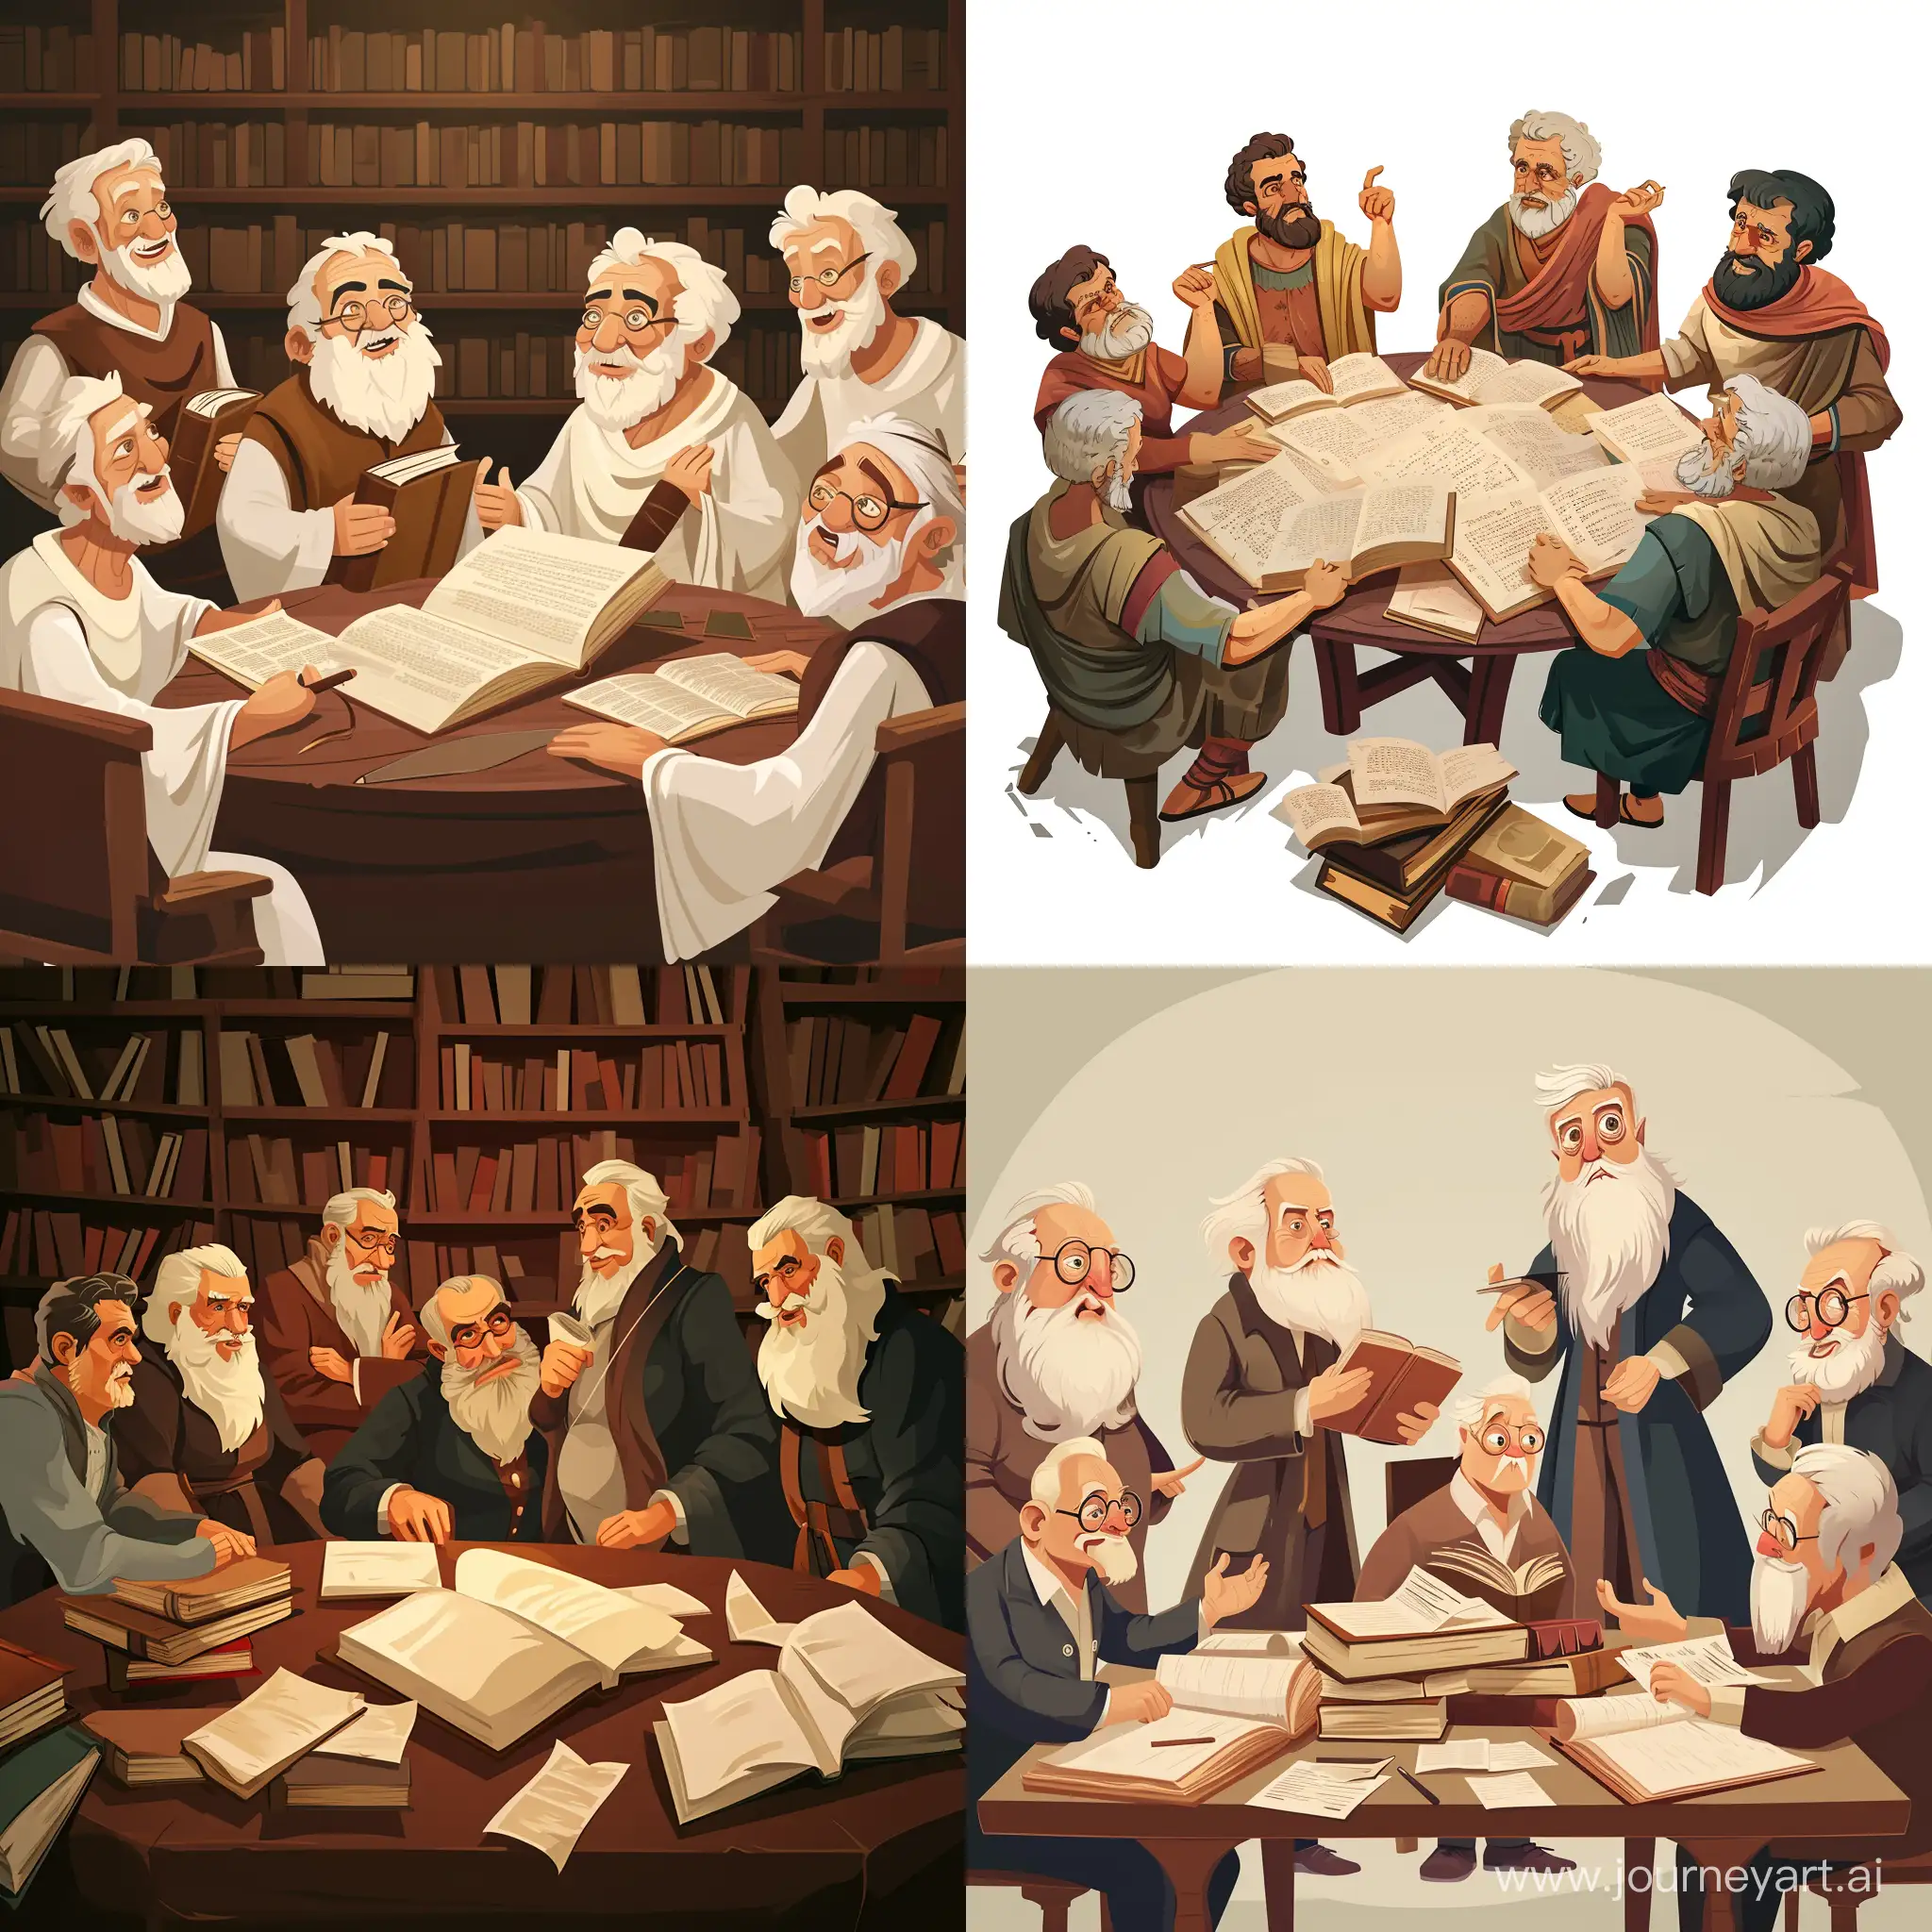 Ancient-Scholars-in-Cartoon-Style-Old-Group-Engaged-in-Studious-Pursuits